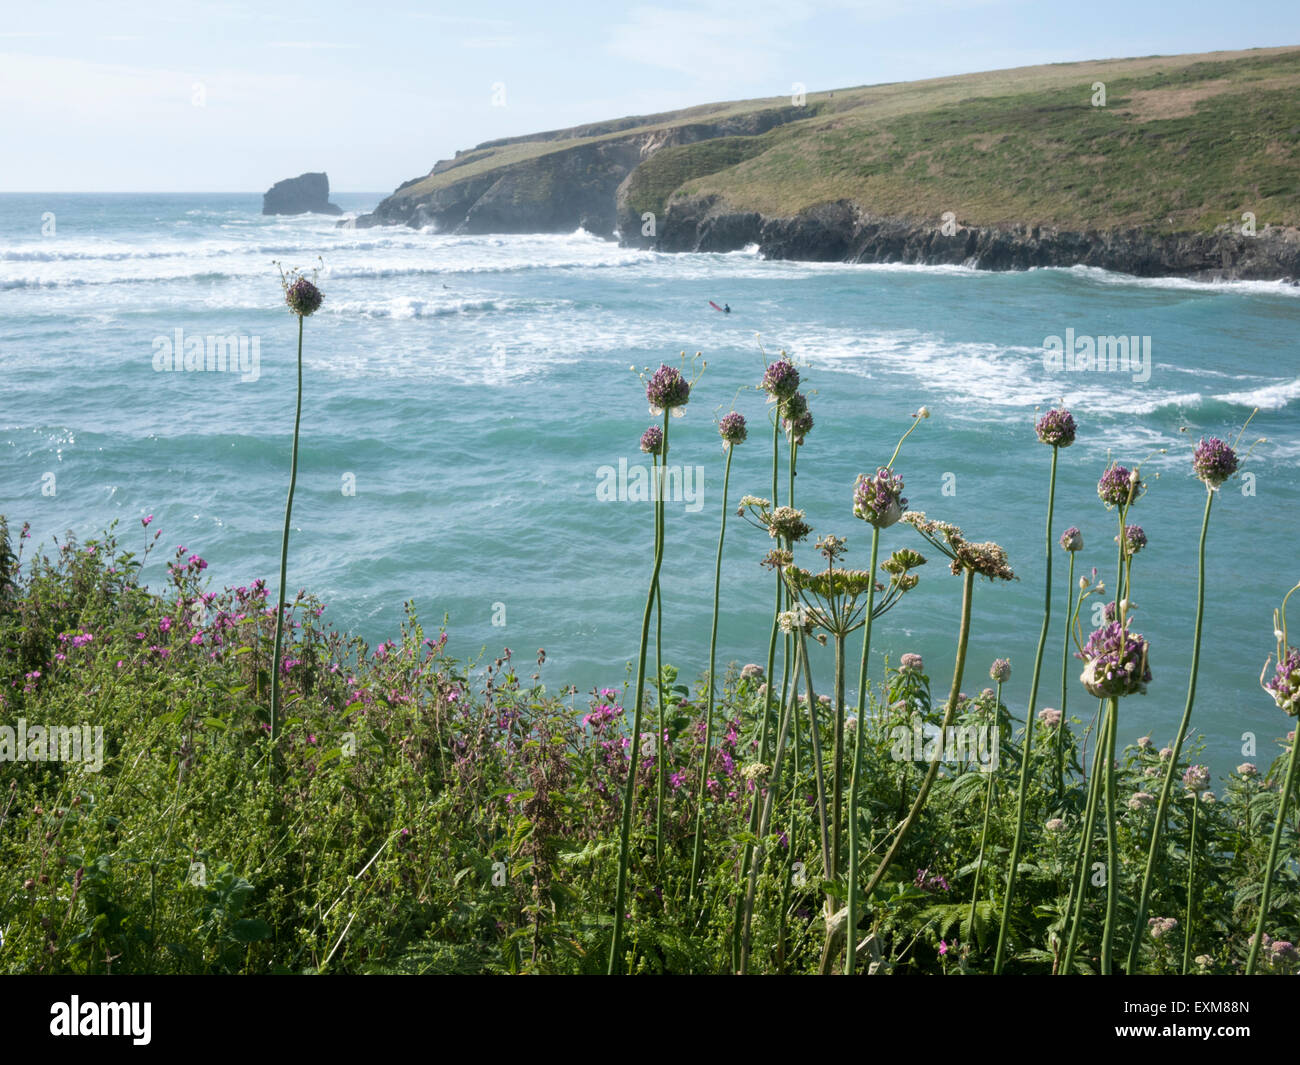 Wild garlic plants and wild flowers growing on the cliff edge at Porthcothan Bay Cornwall UK Stock Photo